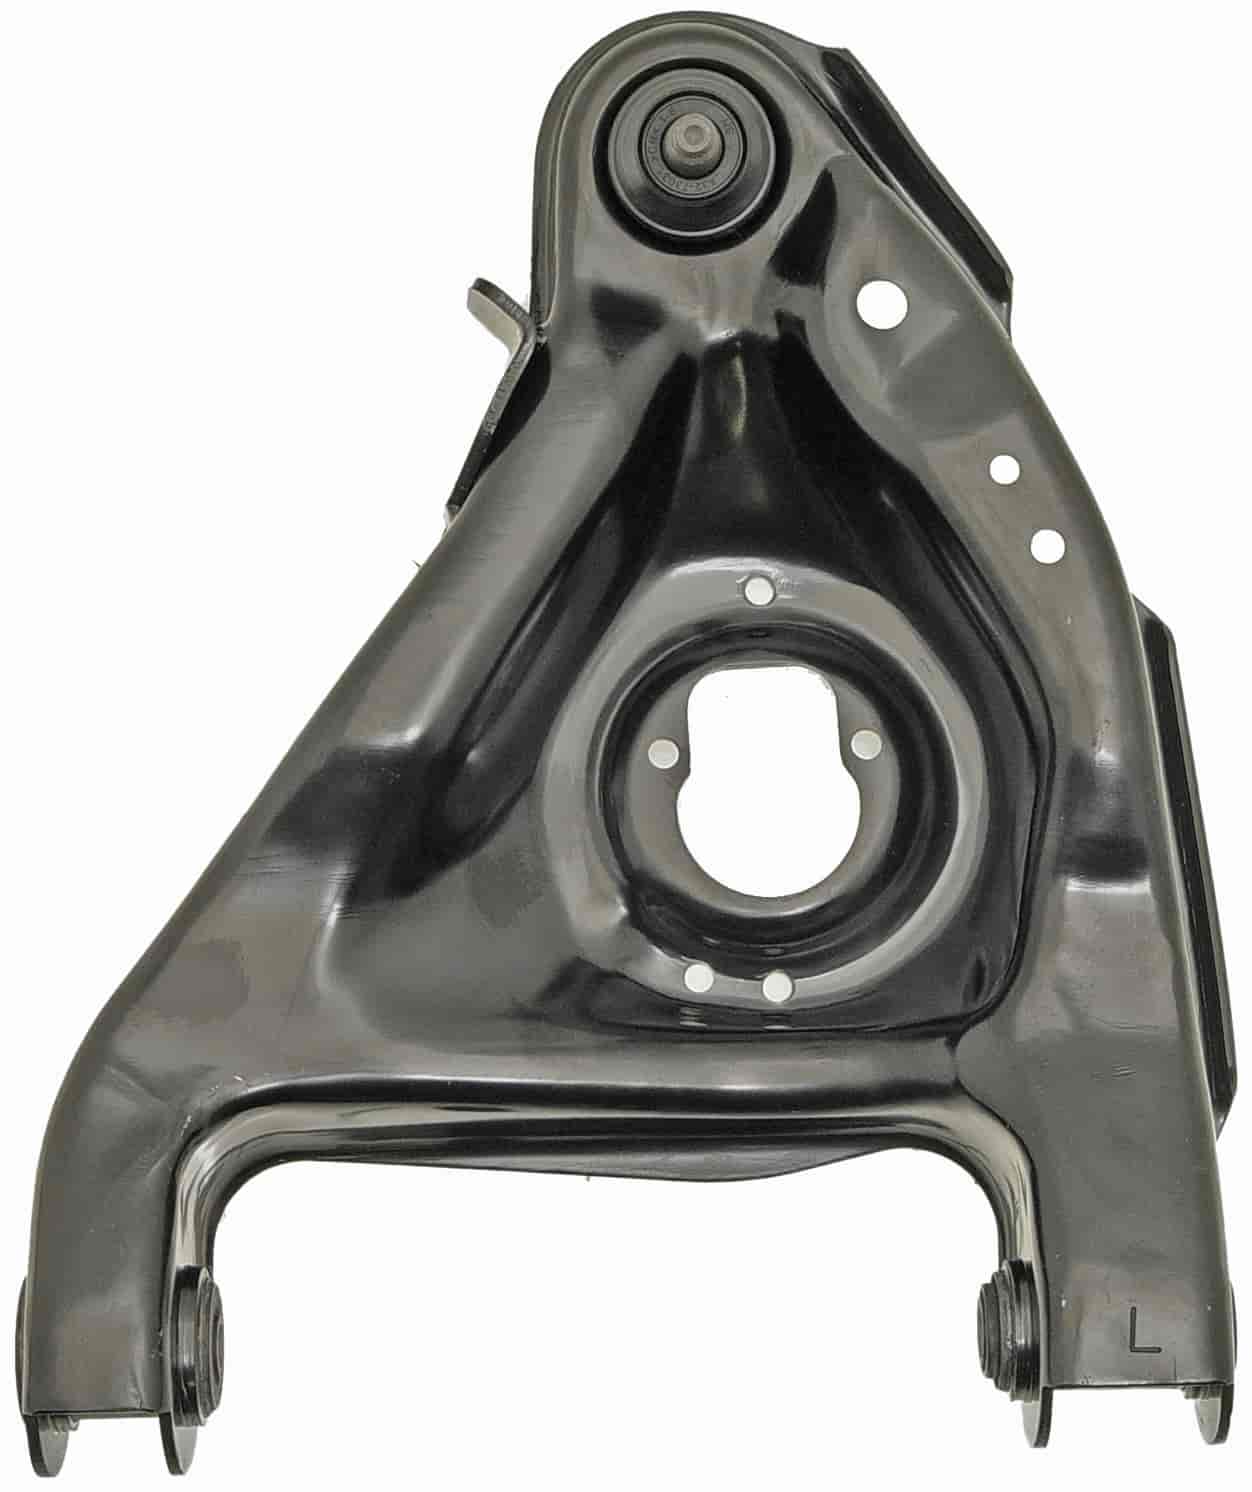 Lower Control Arm 1982-2005 Chevy, 1982-2003 GMC - Front Left]